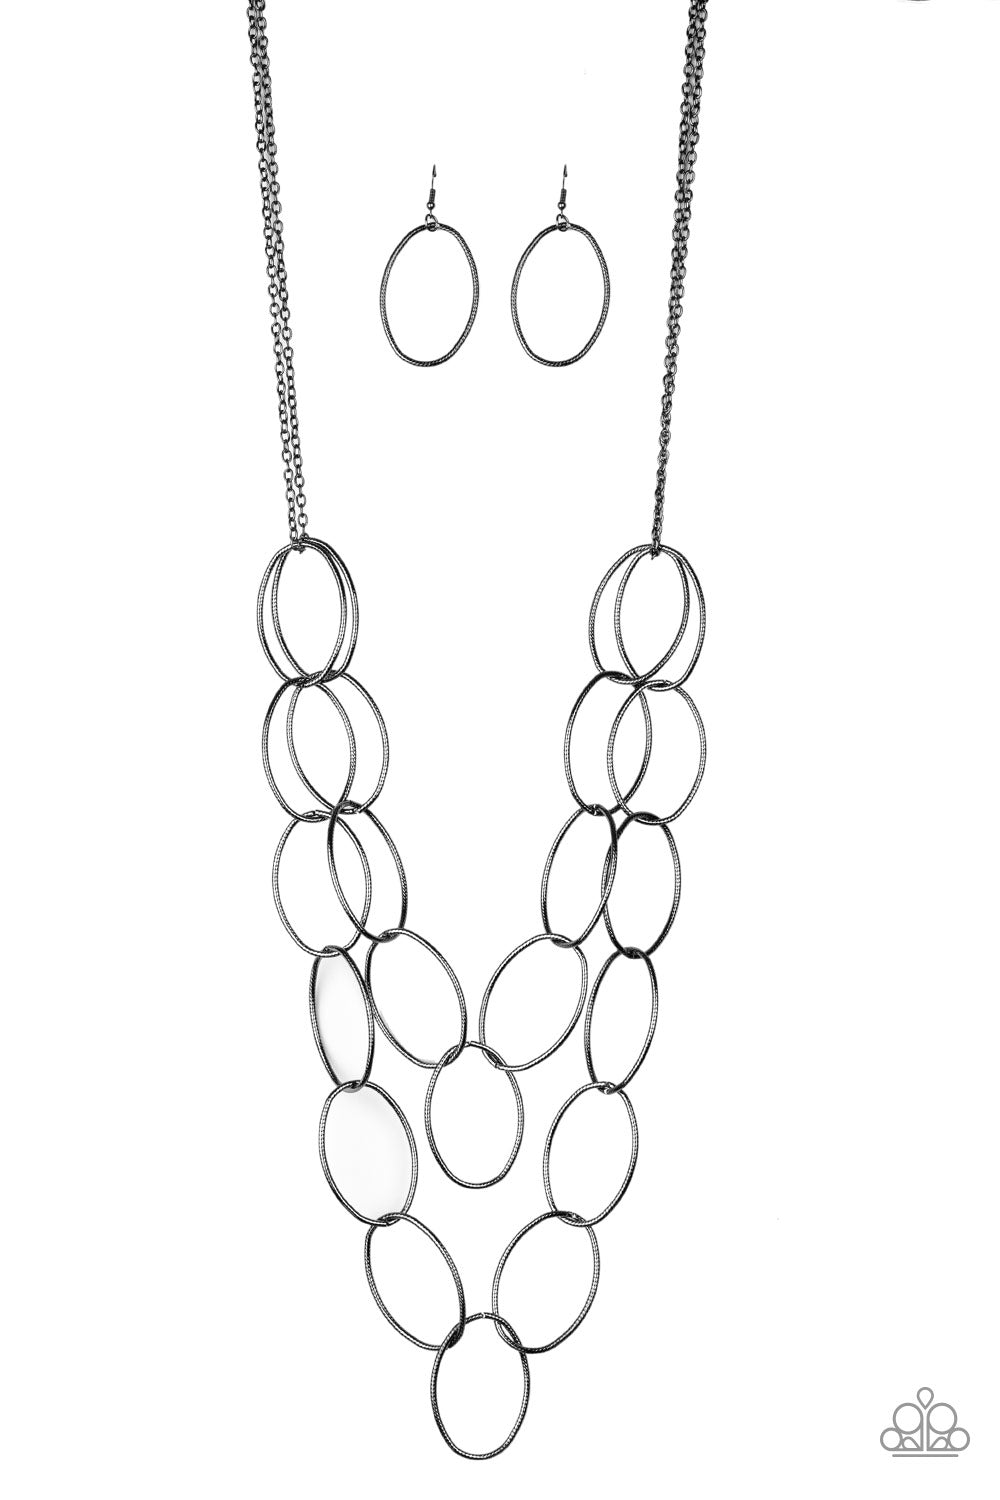 Paparazzi Necklaces - Move On OVAL! - Black